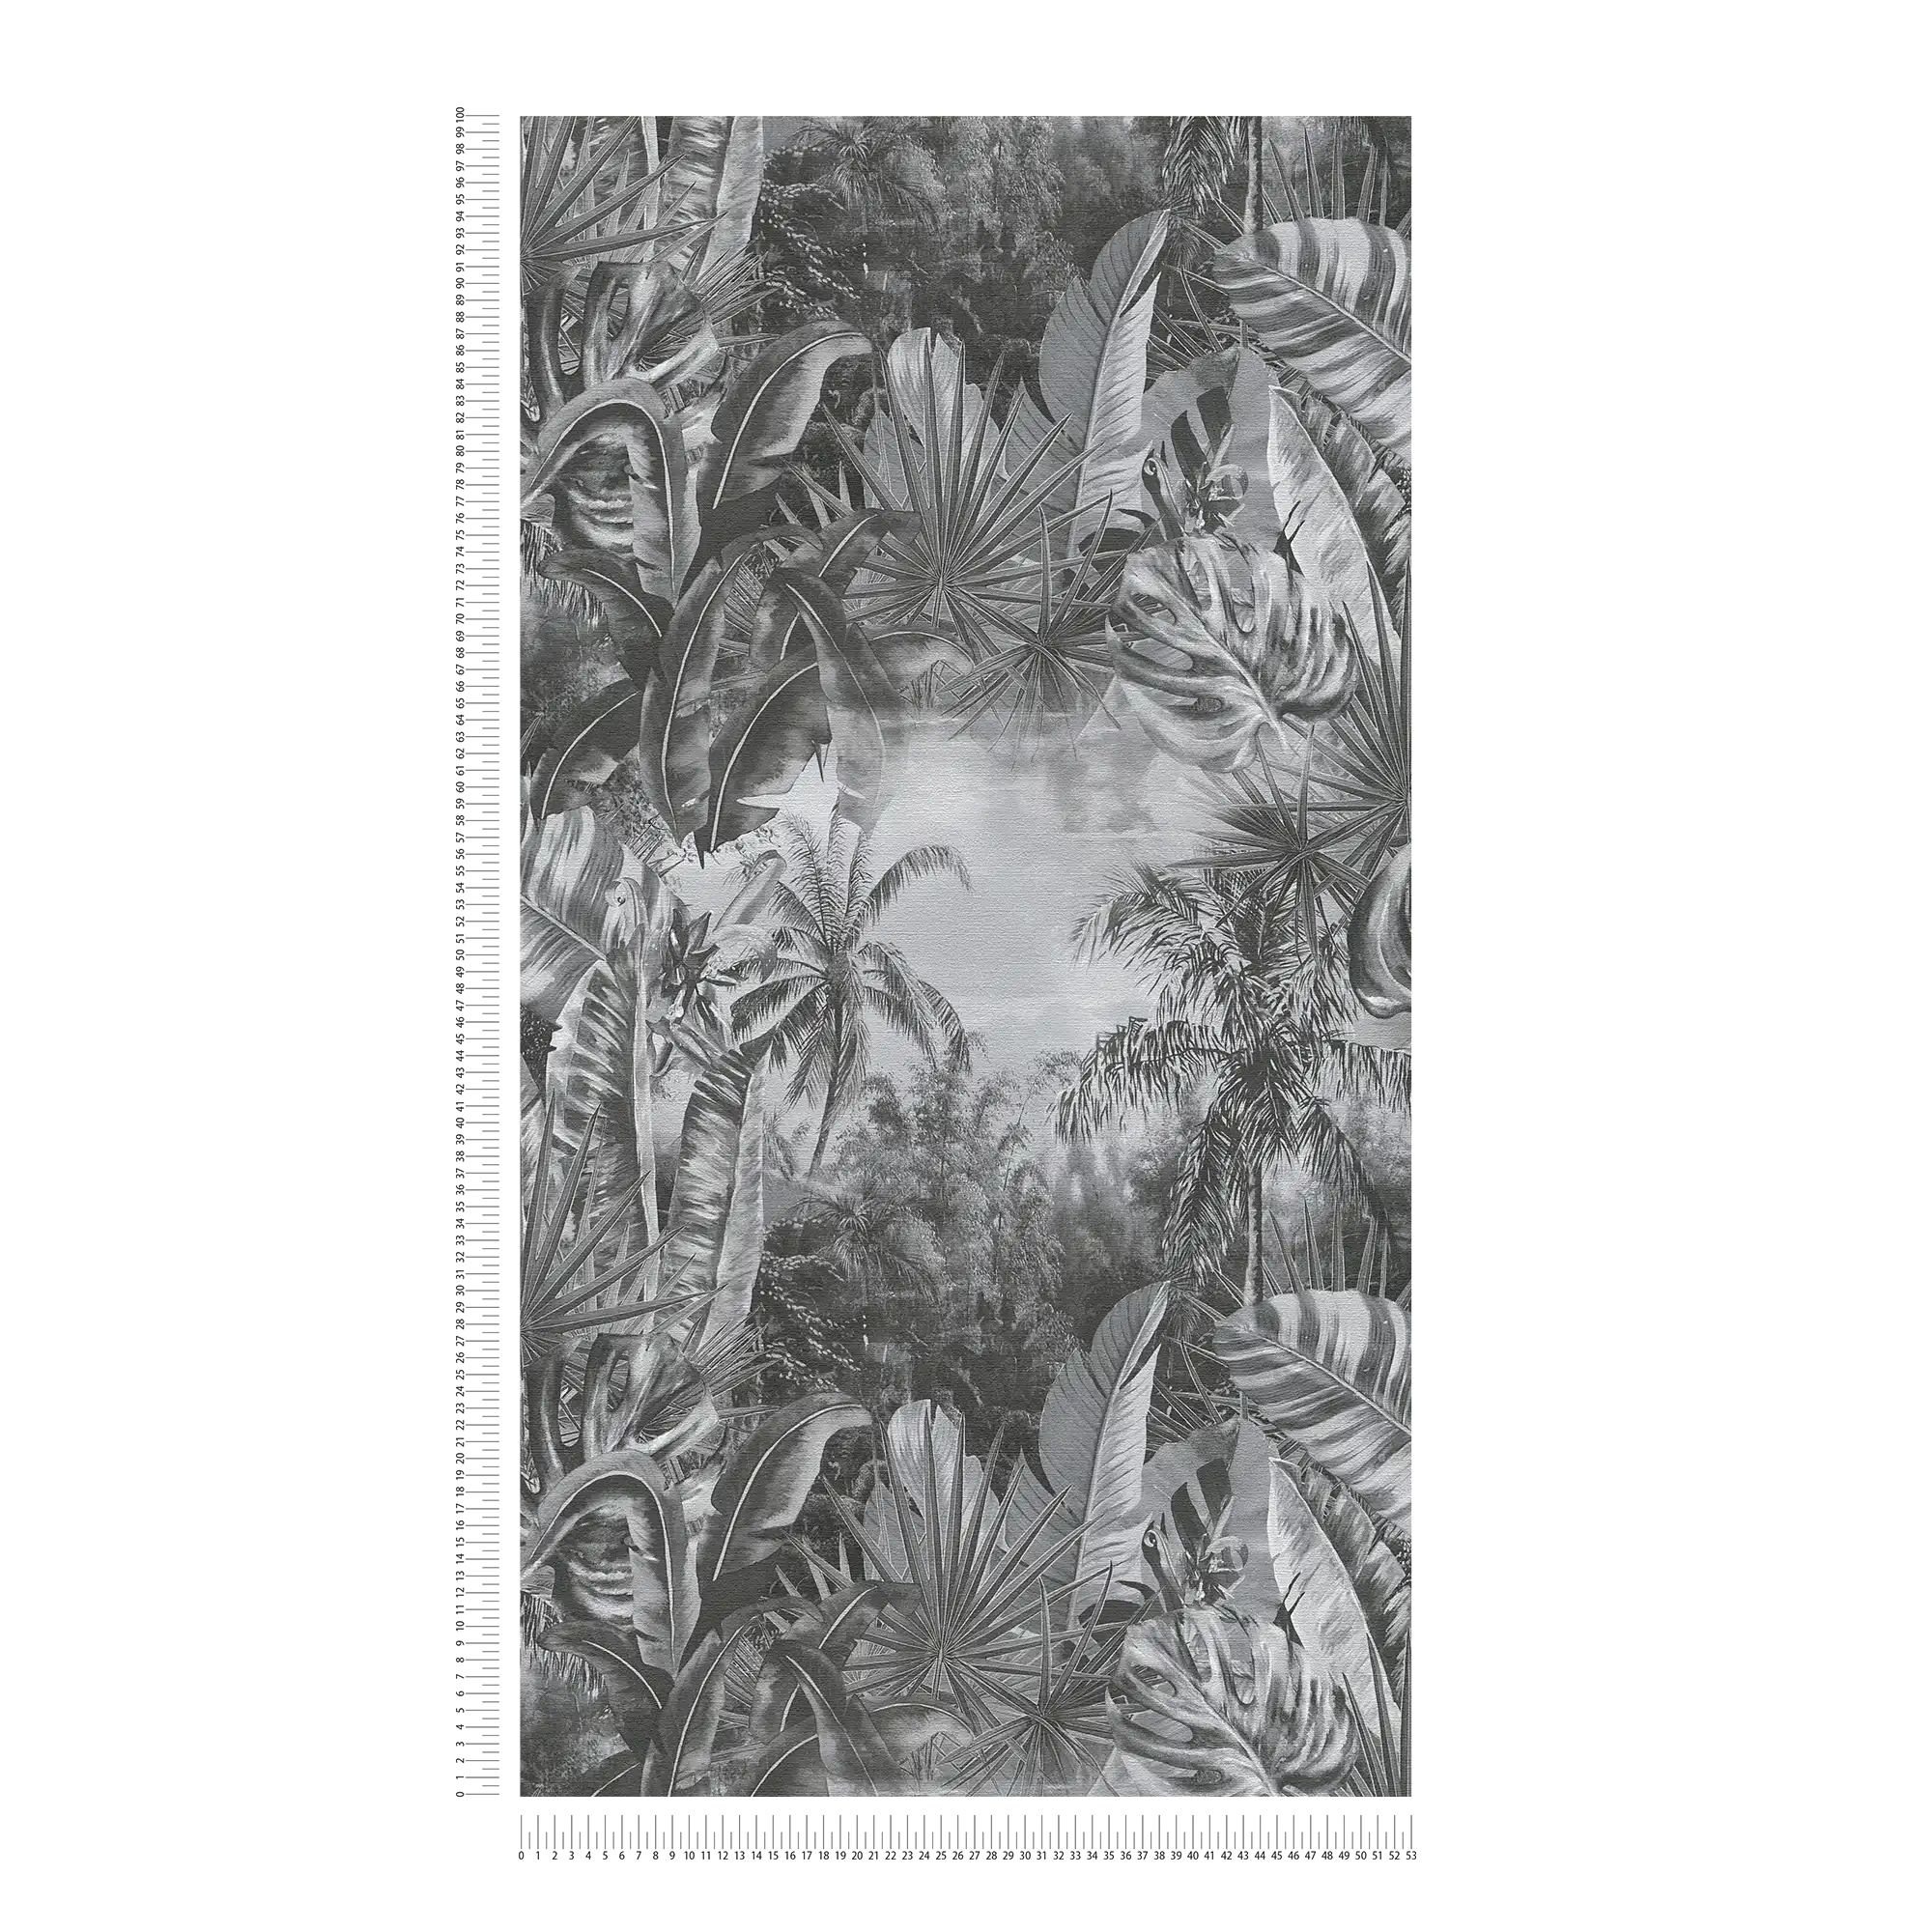             Black and white wallpaper jungle pattern with palm trees
        